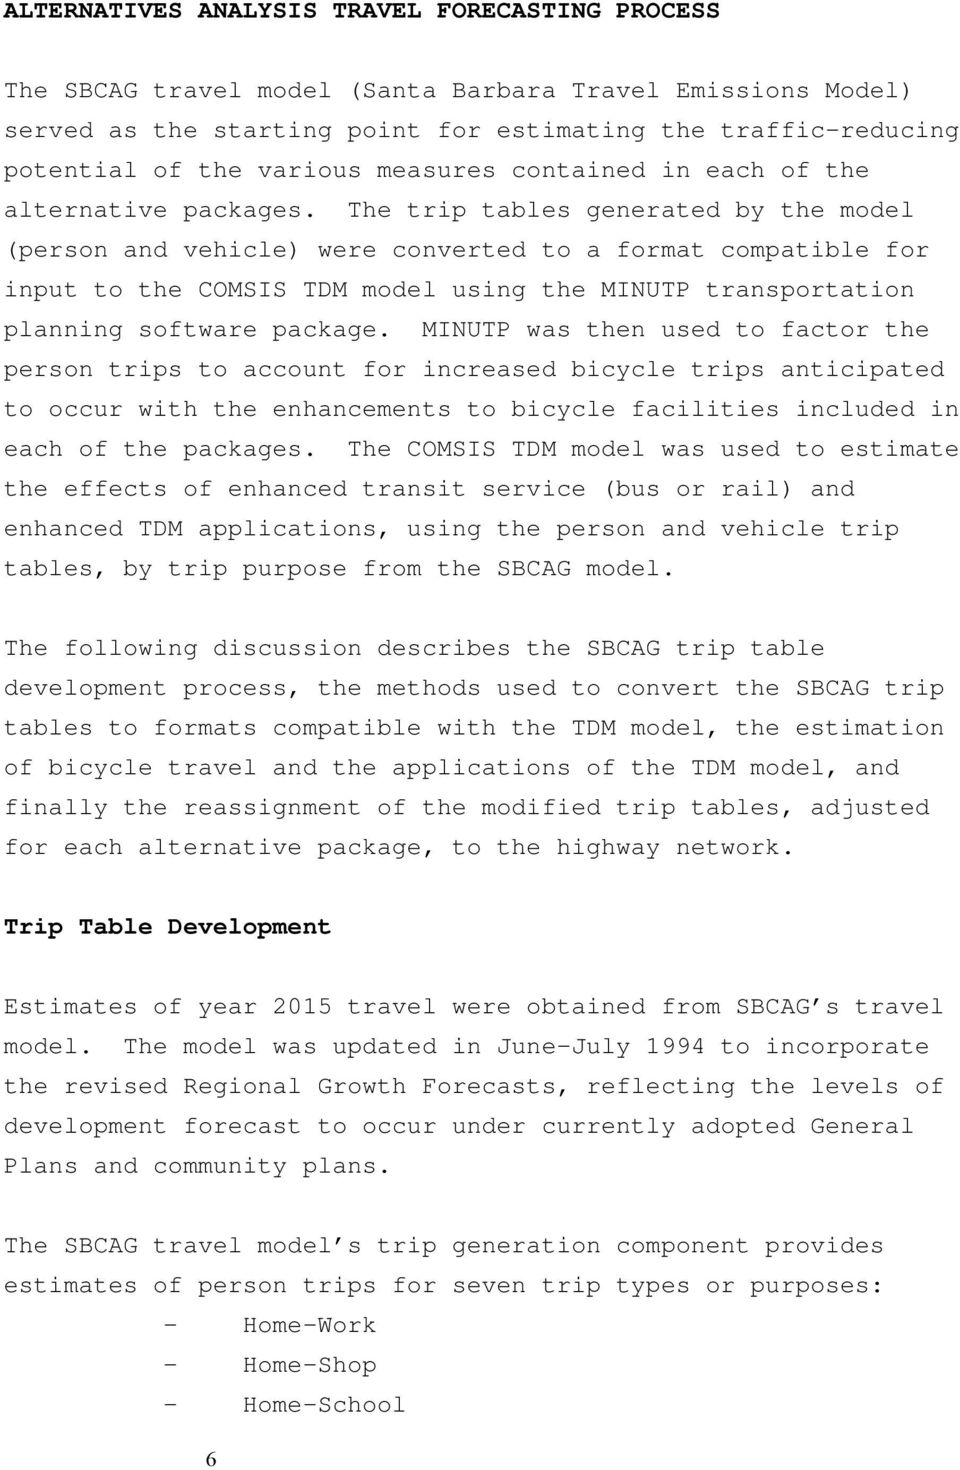 The trip tables generated by the model (person and vehicle) were converted to a format compatible for input to the COMSIS TDM model using the MINUTP transportation planning software package.